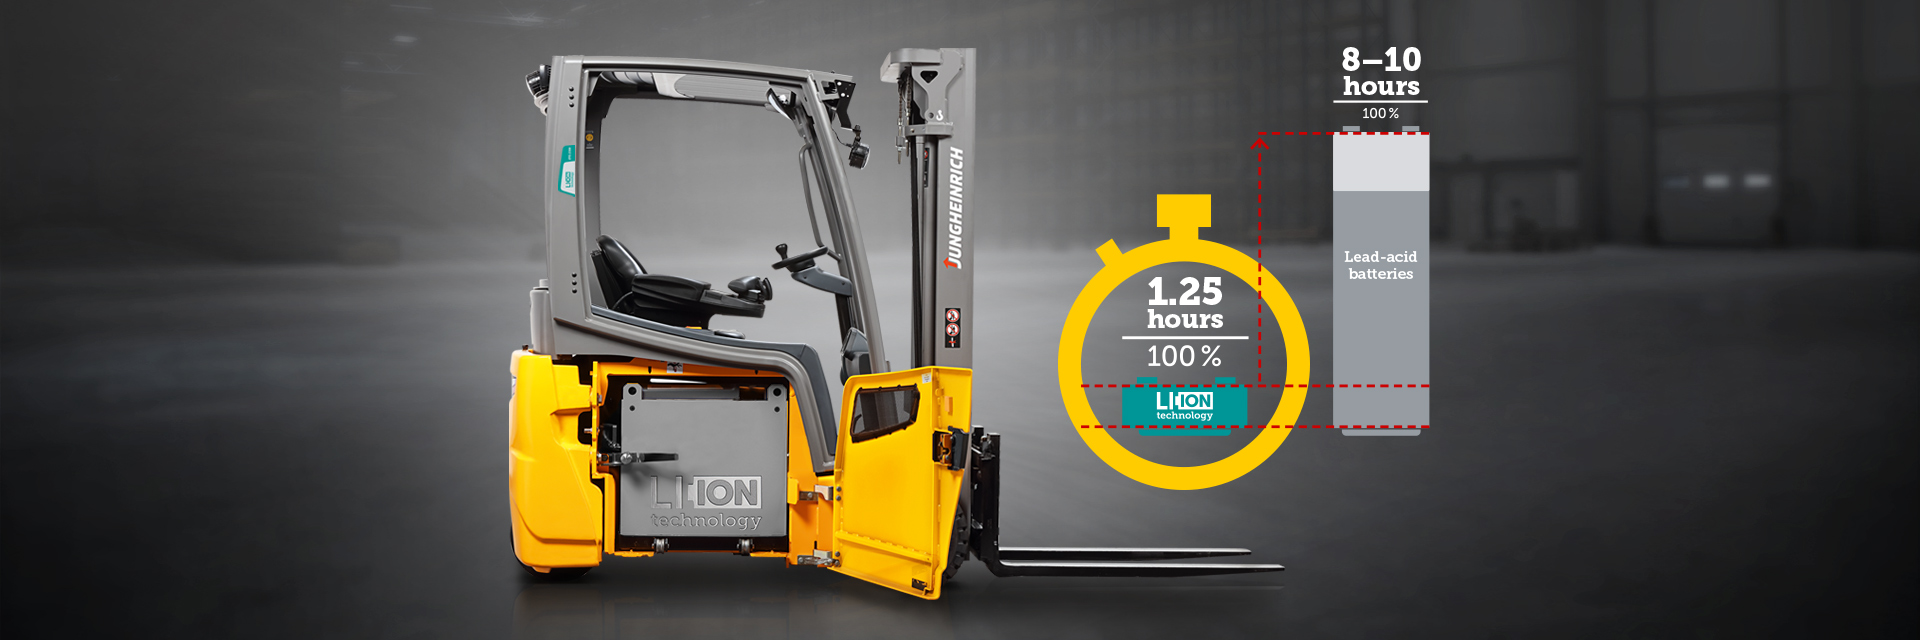 Lithium Ion Technology From Jungheinrich Its Forklifts